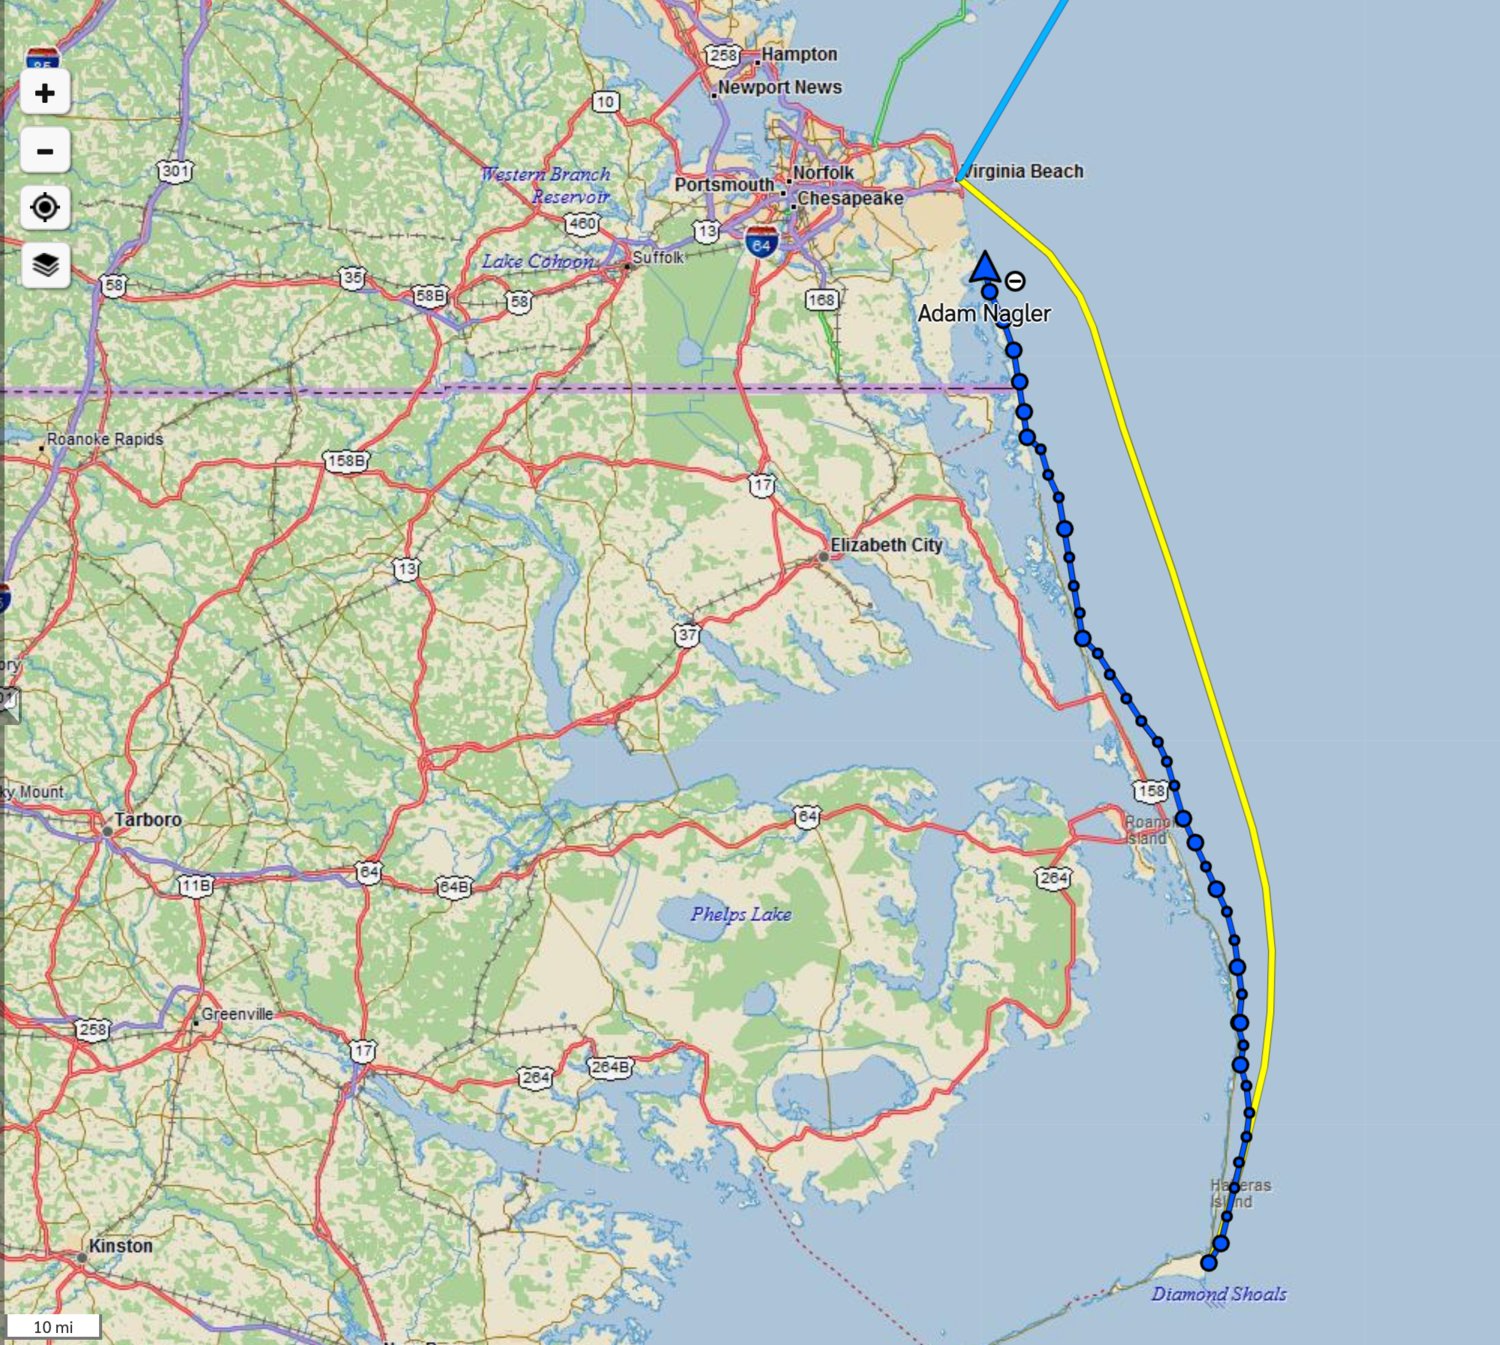 The dotted blue line shows Adam Nagler's actual route. He is hoping to reach Cape Henry (just north of Virginia Beach) today before the wind direction shifts against him.